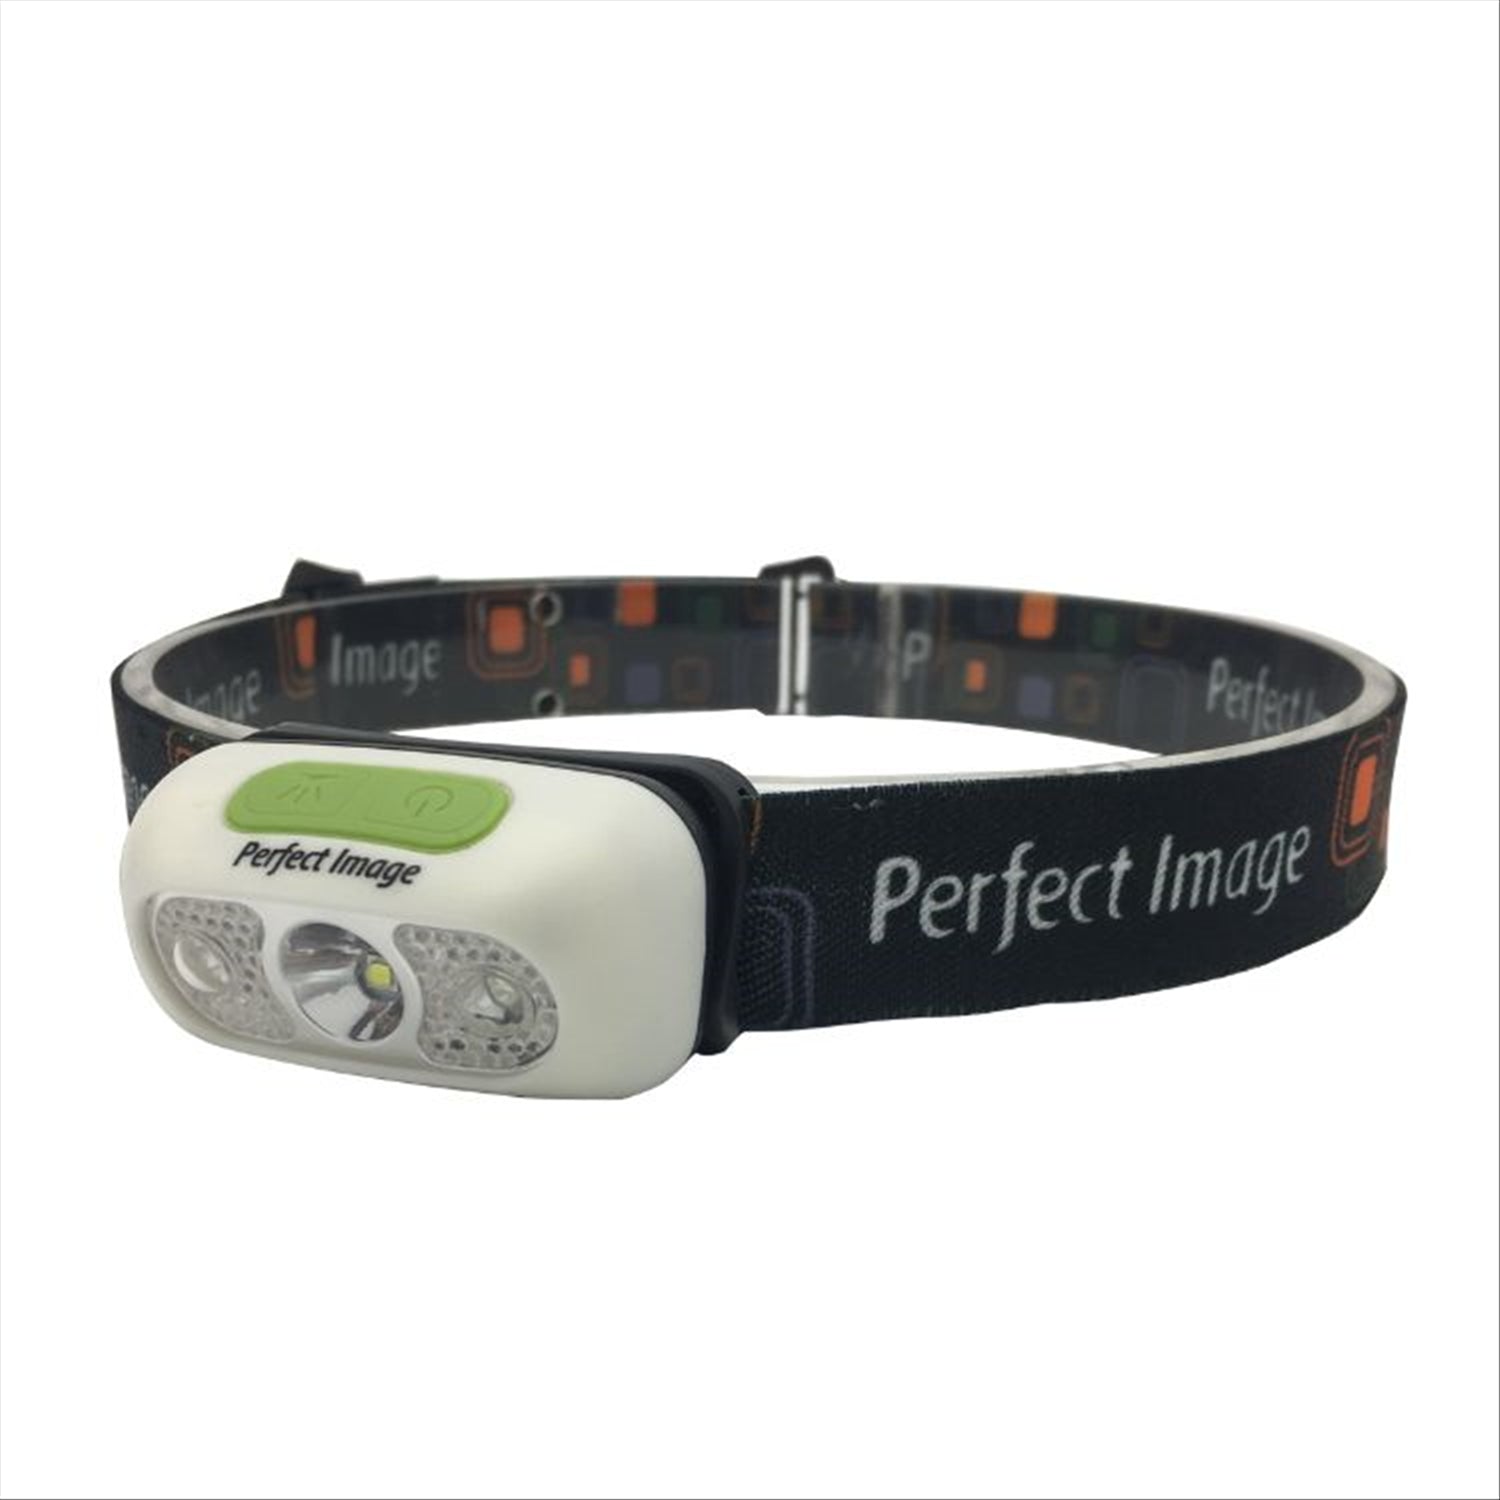 PERFECT IMAGE Perfect Image Rechargeable Headlamp 230 Lumens